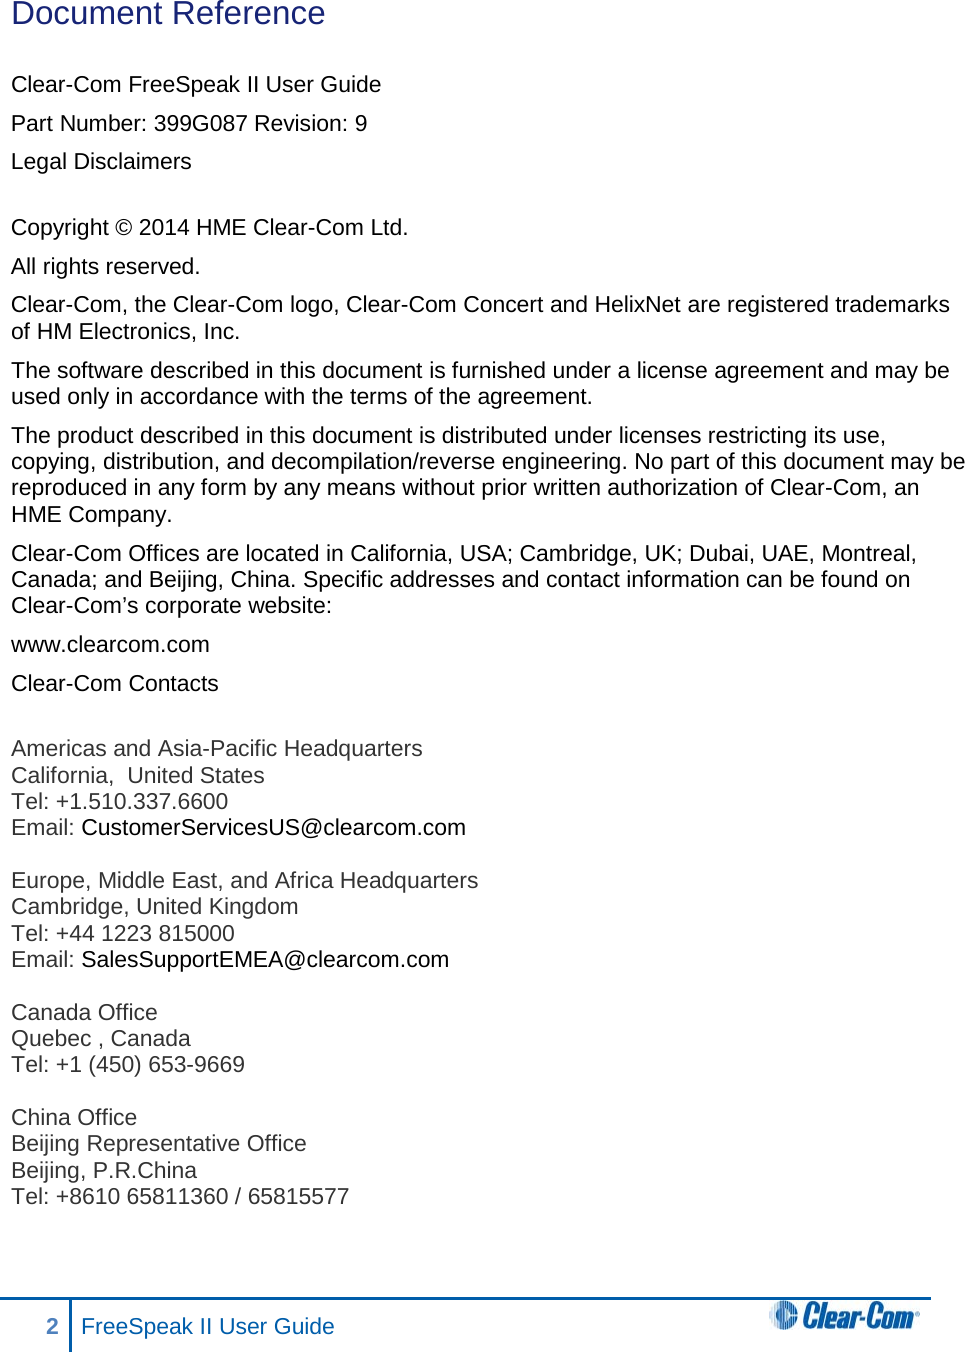 Document Reference  Clear-Com FreeSpeak II User Guide  Part Number: 399G087 Revision: 9 Legal Disclaimers  Copyright © 2014 HME Clear-Com Ltd. All rights reserved. Clear-Com, the Clear-Com logo, Clear-Com Concert and HelixNet are registered trademarks of HM Electronics, Inc. The software described in this document is furnished under a license agreement and may be used only in accordance with the terms of the agreement.  The product described in this document is distributed under licenses restricting its use, copying, distribution, and decompilation/reverse engineering. No part of this document may be reproduced in any form by any means without prior written authorization of Clear-Com, an HME Company. Clear-Com Offices are located in California, USA; Cambridge, UK; Dubai, UAE, Montreal, Canada; and Beijing, China. Specific addresses and contact information can be found on Clear-Com’s corporate website: www.clearcom.com Clear-Com Contacts  Americas and Asia-Pacific Headquarters California,  United States Tel: +1.510.337.6600 Email: CustomerServicesUS@clearcom.com  Europe, Middle East, and Africa Headquarters Cambridge, United Kingdom Tel: +44 1223 815000 Email: SalesSupportEMEA@clearcom.com  Canada Office Quebec , Canada Tel: +1 (450) 653-9669  China Office Beijing Representative Office Beijing, P.R.China Tel: +8610 65811360 / 65815577  2  FreeSpeak II User Guide   